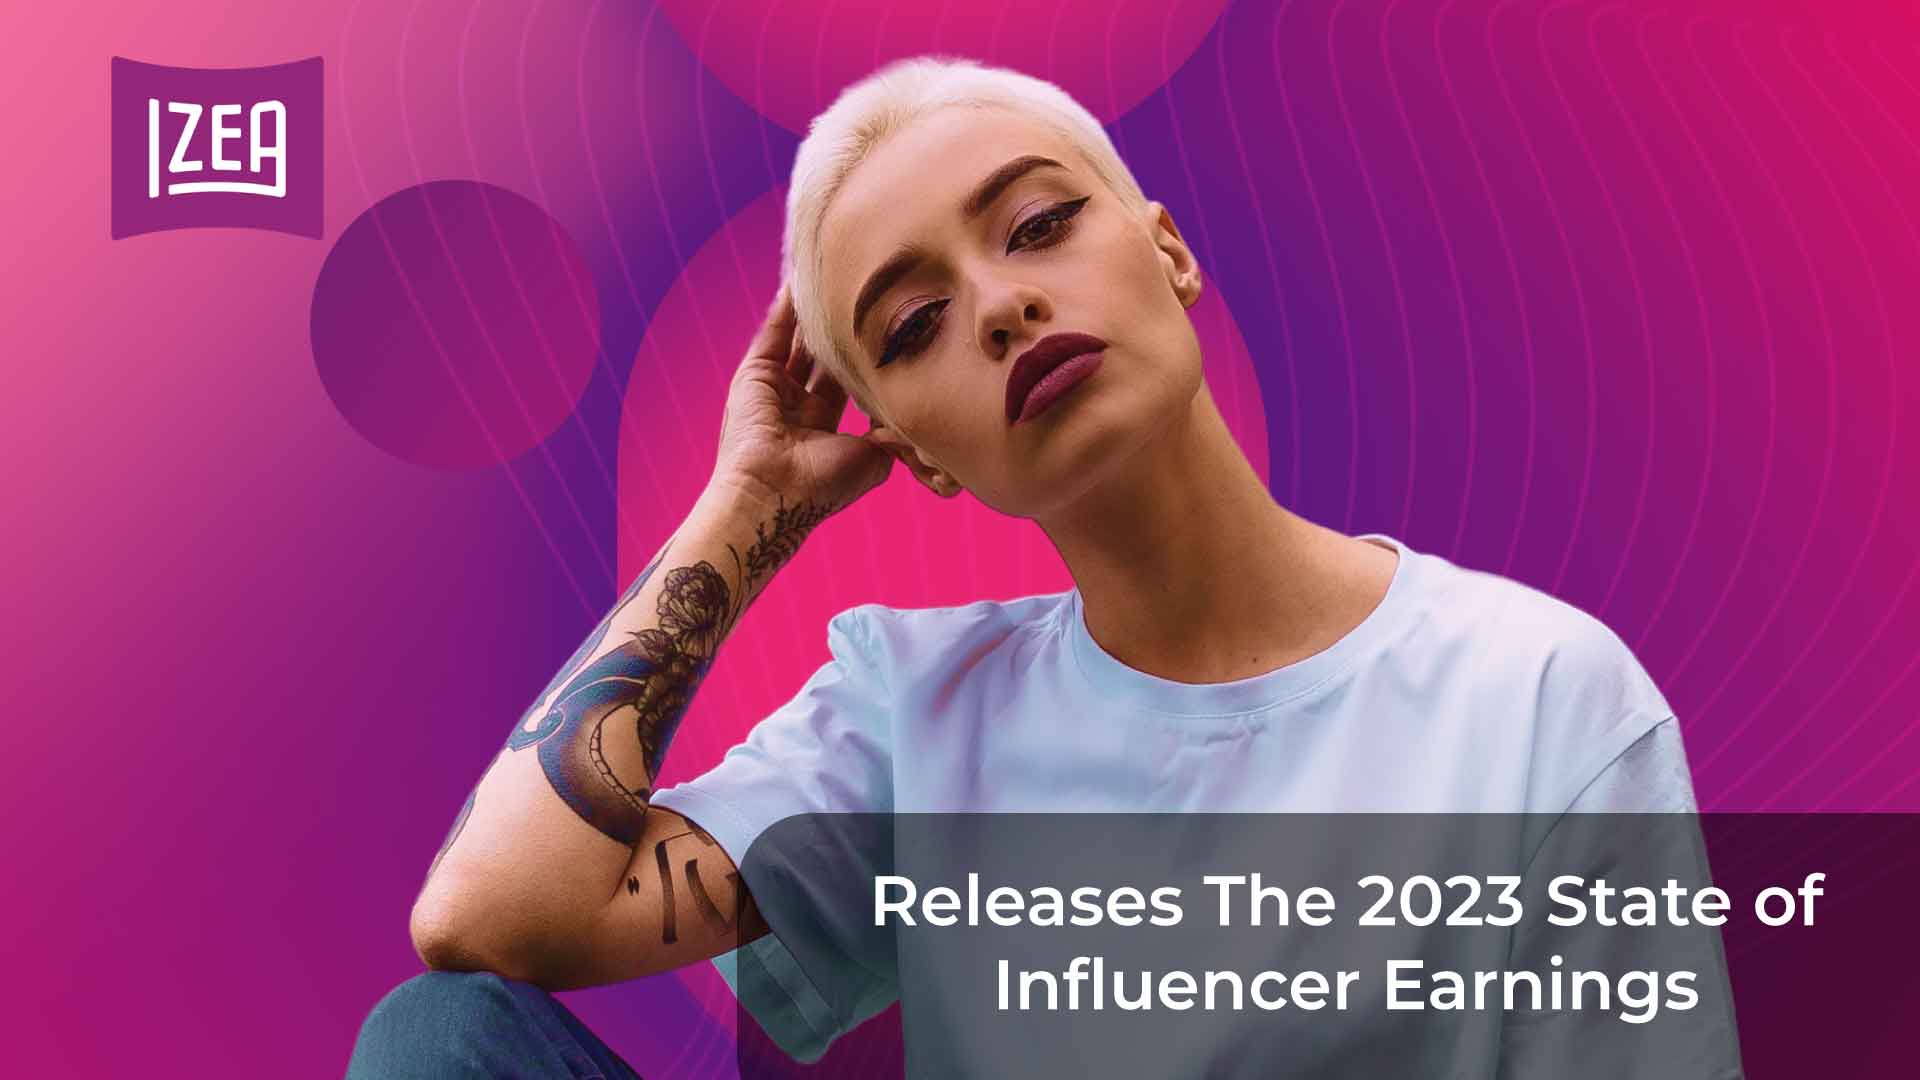 IZEA Releases The 2023 State of Influencer Earnings